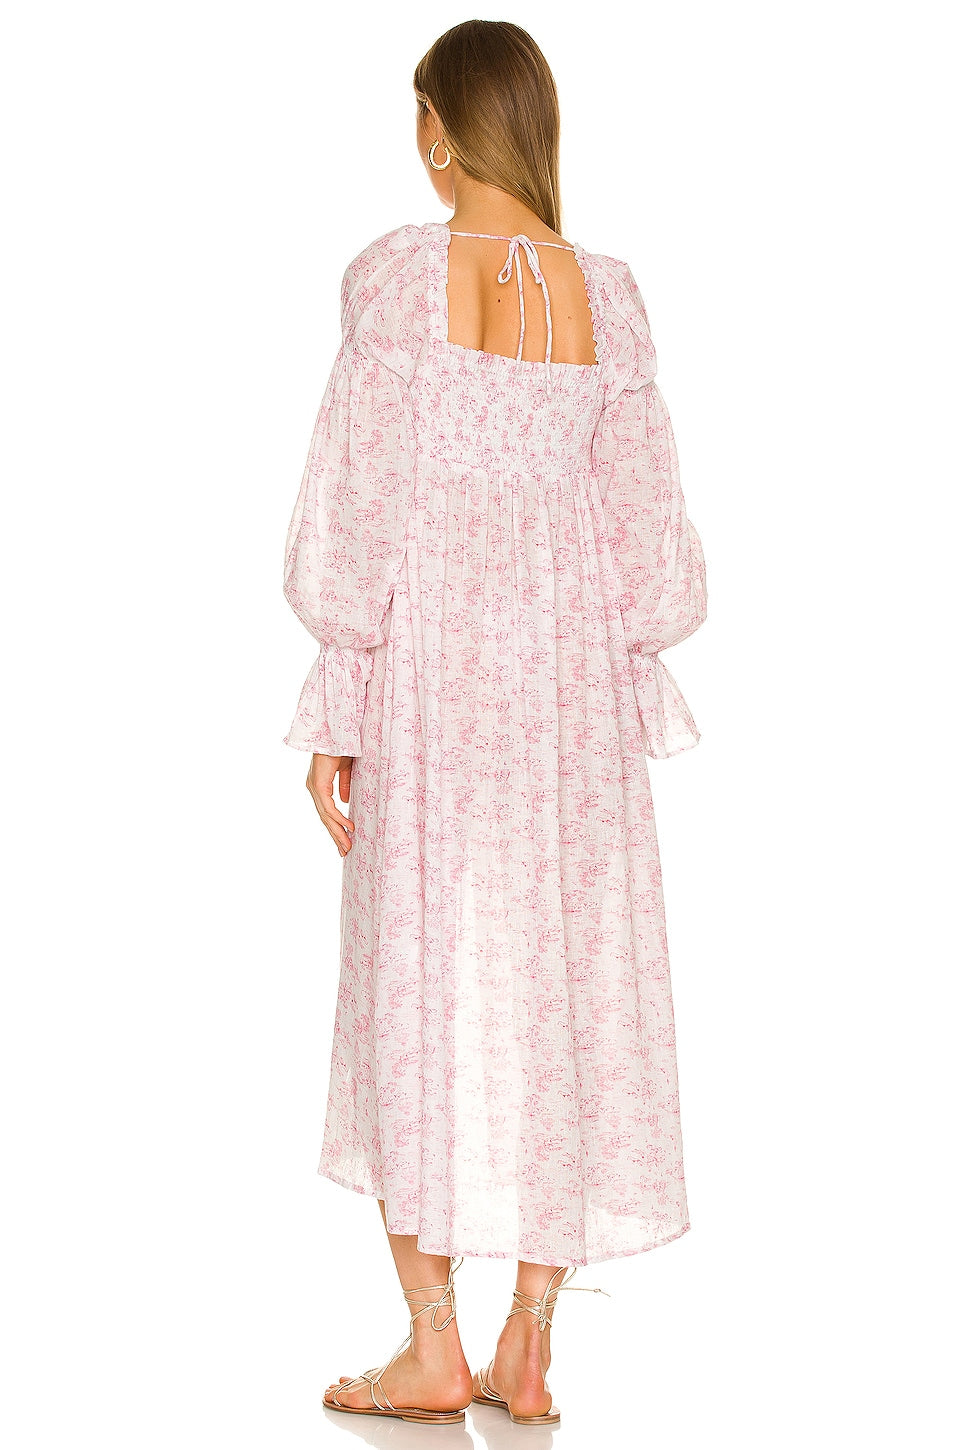 Melora Robe in PINK TOILE